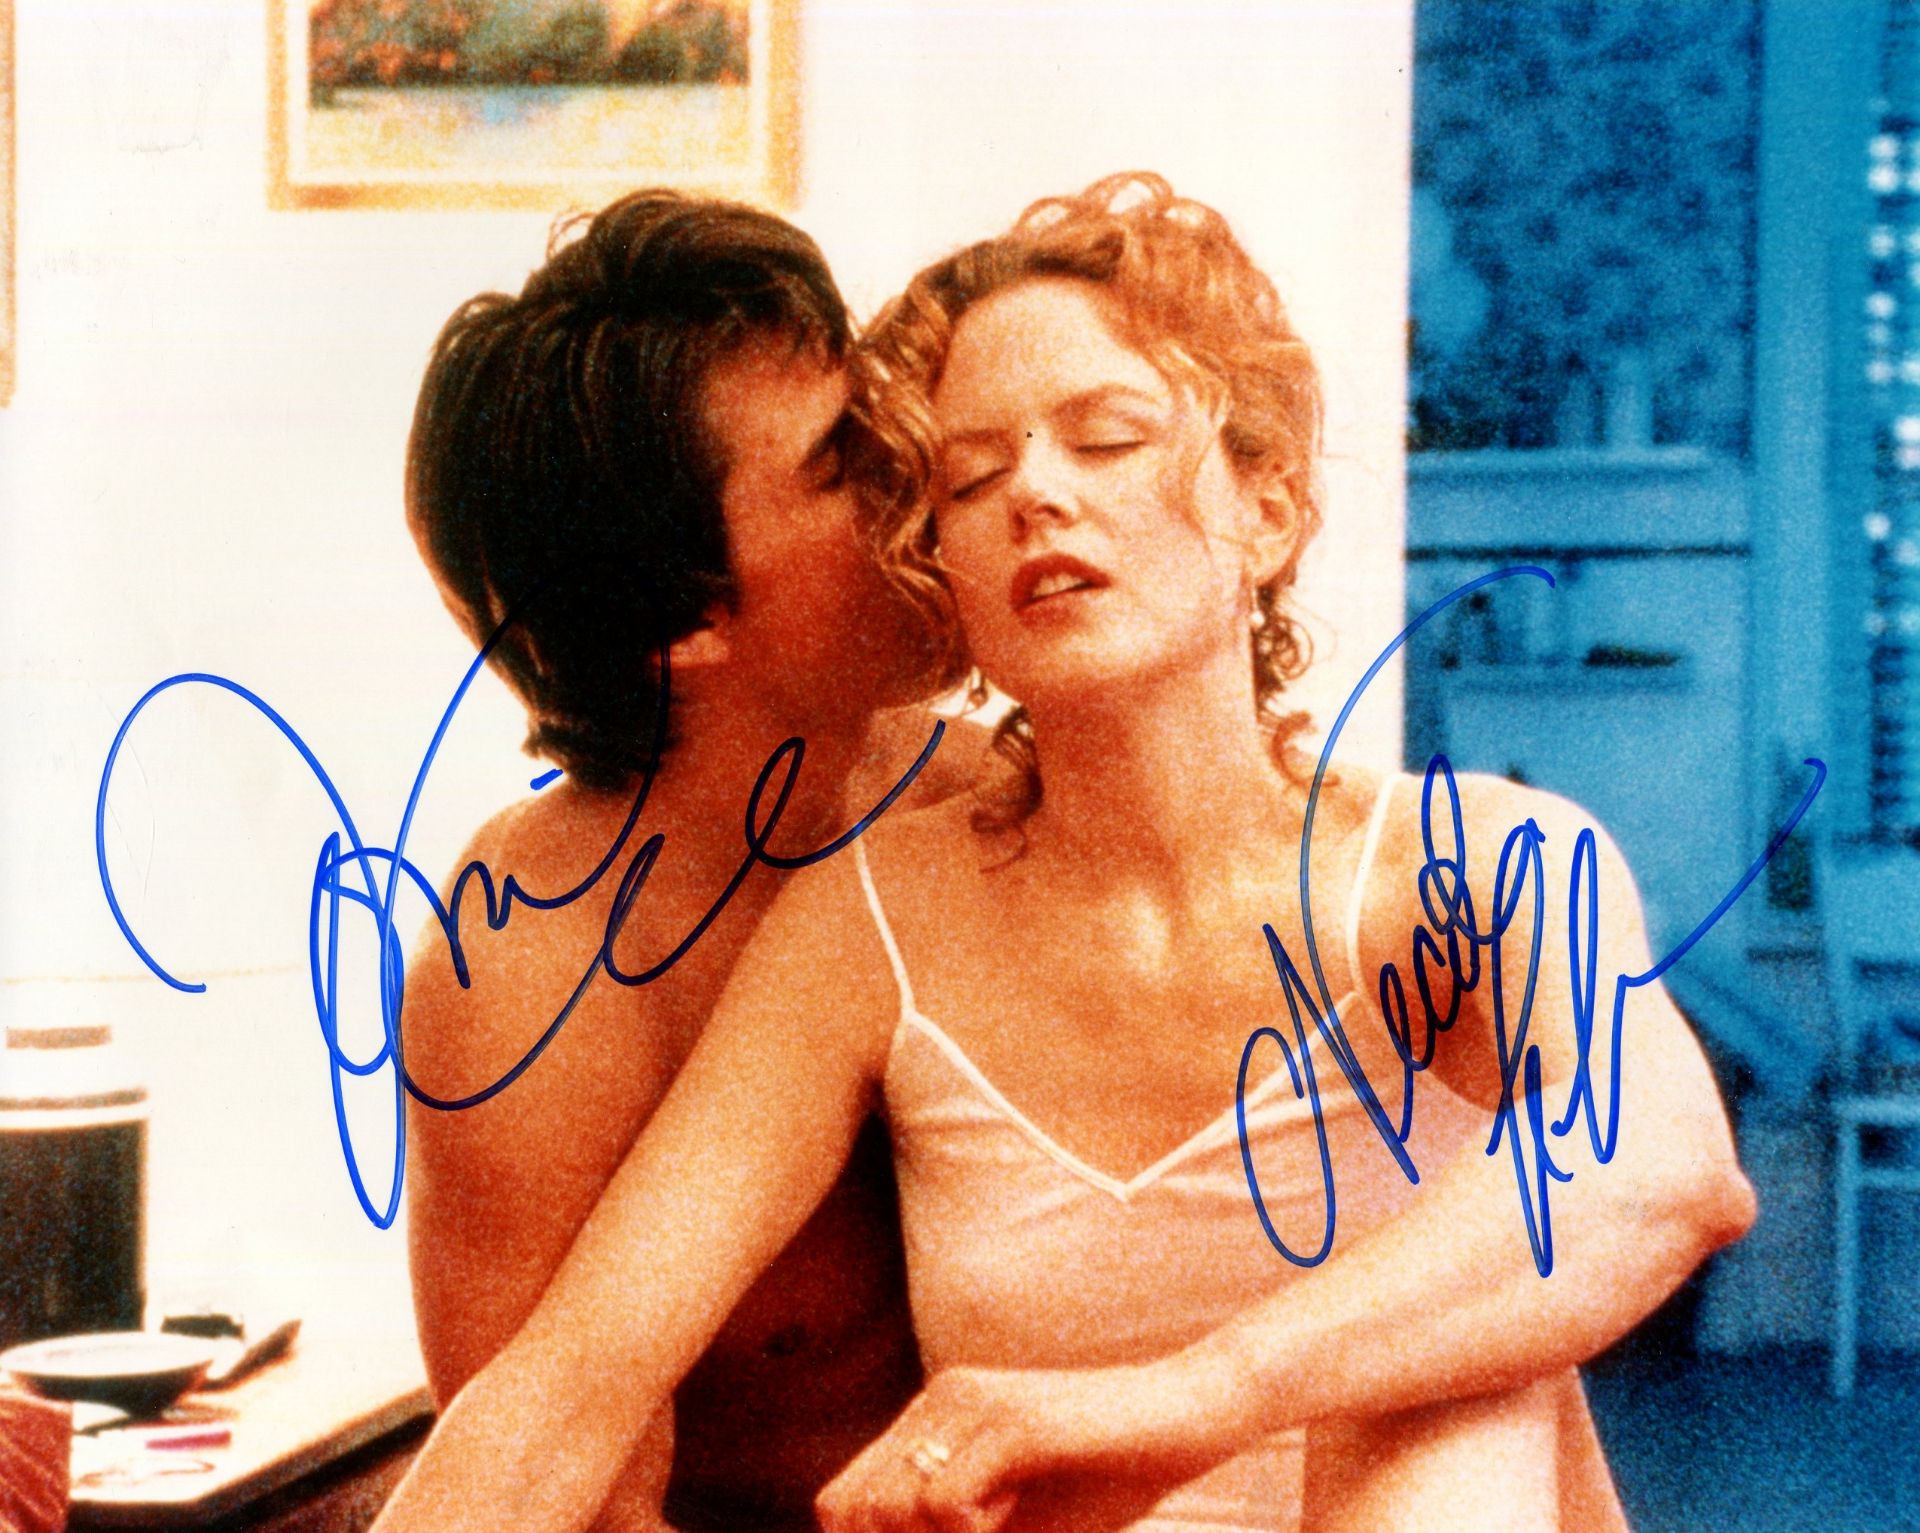 EYES WIDE SHUT: Signed colour 10 x 8 photograph by both Tom Cruise (Dr.